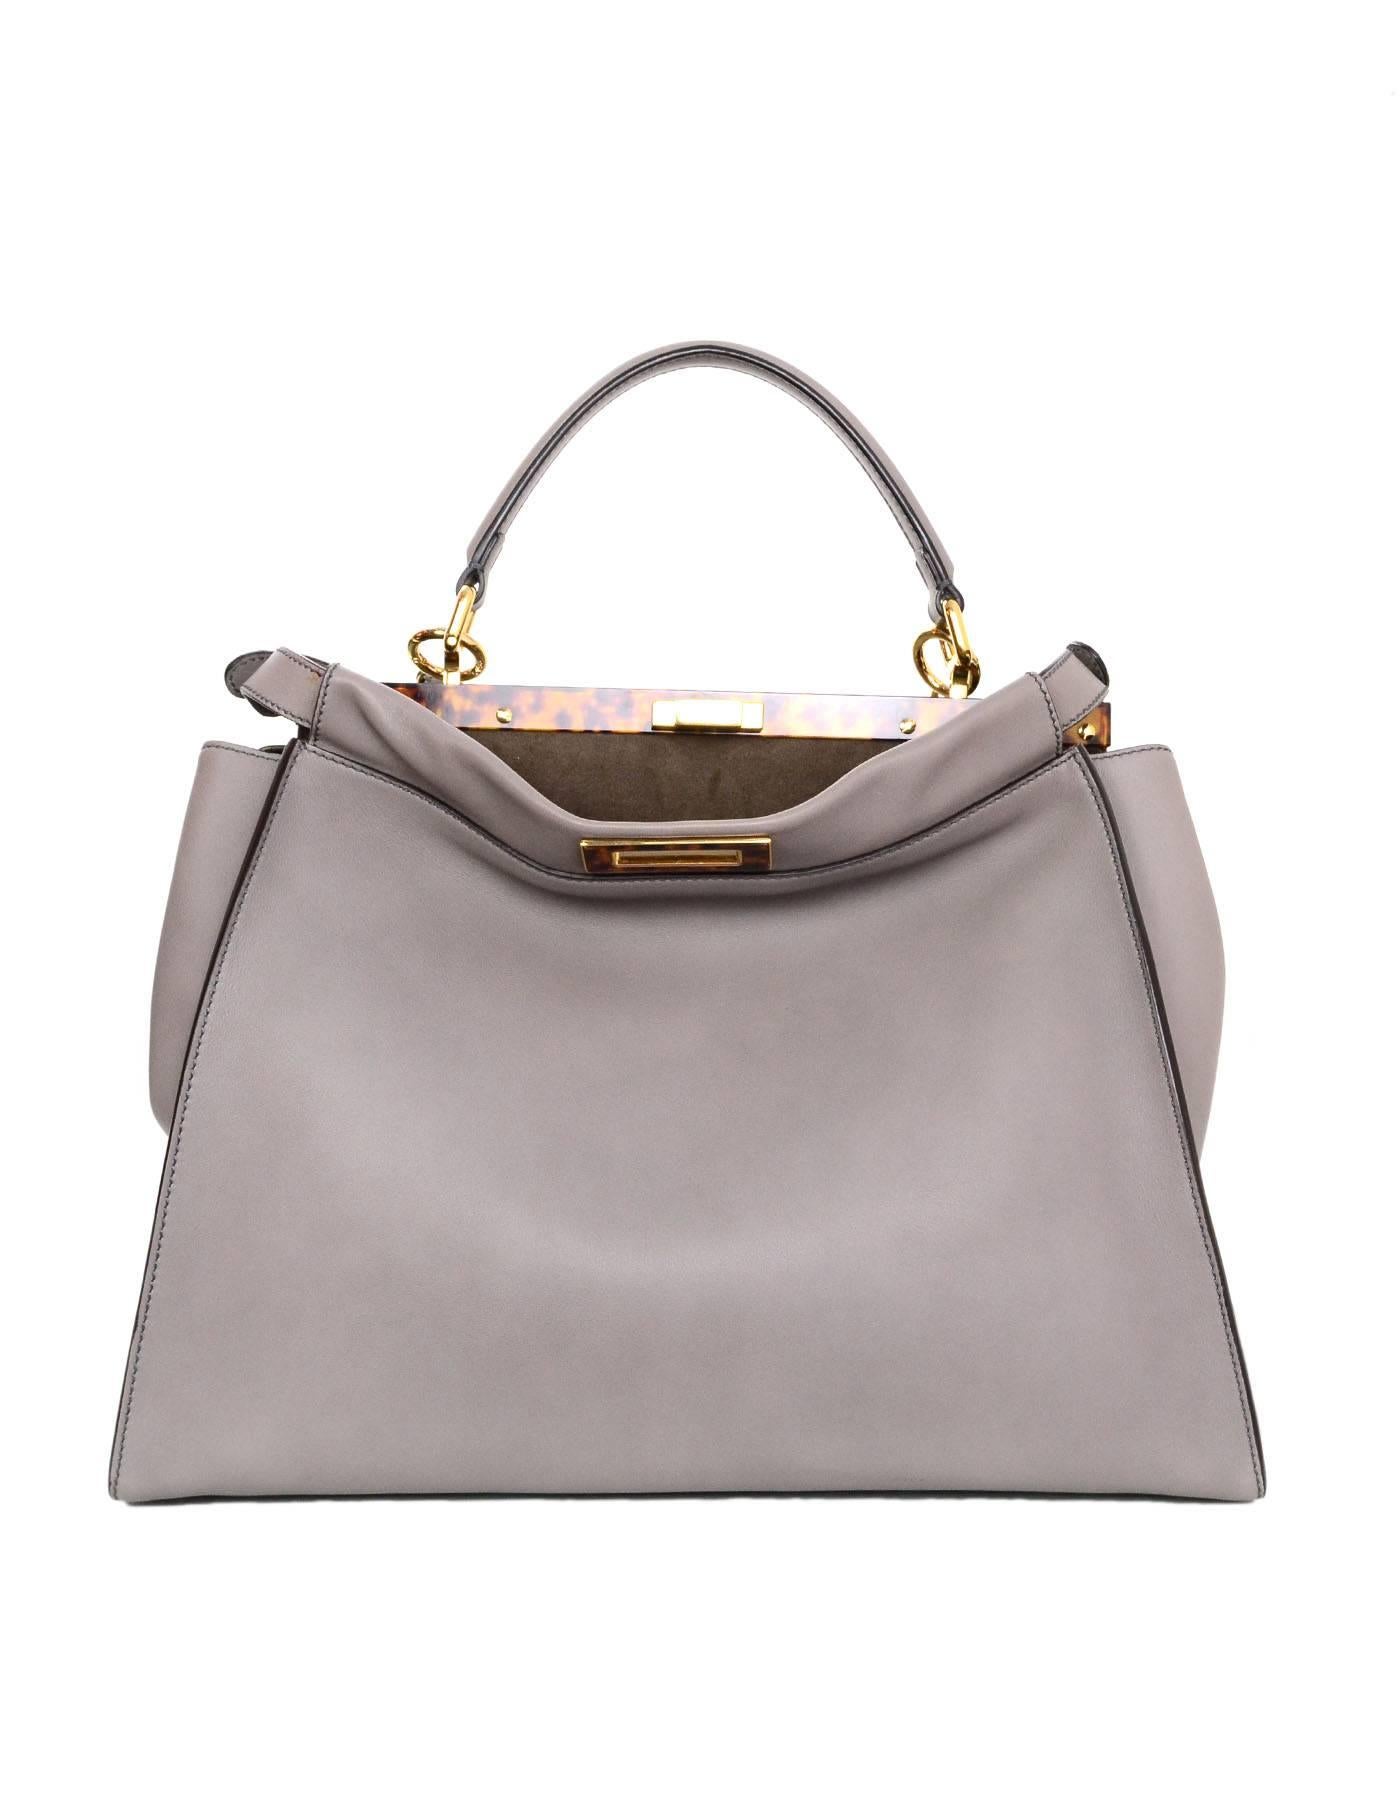 Fendi Grey Leather Large Peek-a-Boo Satchel
Features optional shoulder strap and peekaboo tortoise trim

Made In: Italy
Colors: Grey, brown tortoise
Hardware: Goldtone
Materials: Leather, metal, tortoise
Lining: Grey suede
Closure/Opening: Twist